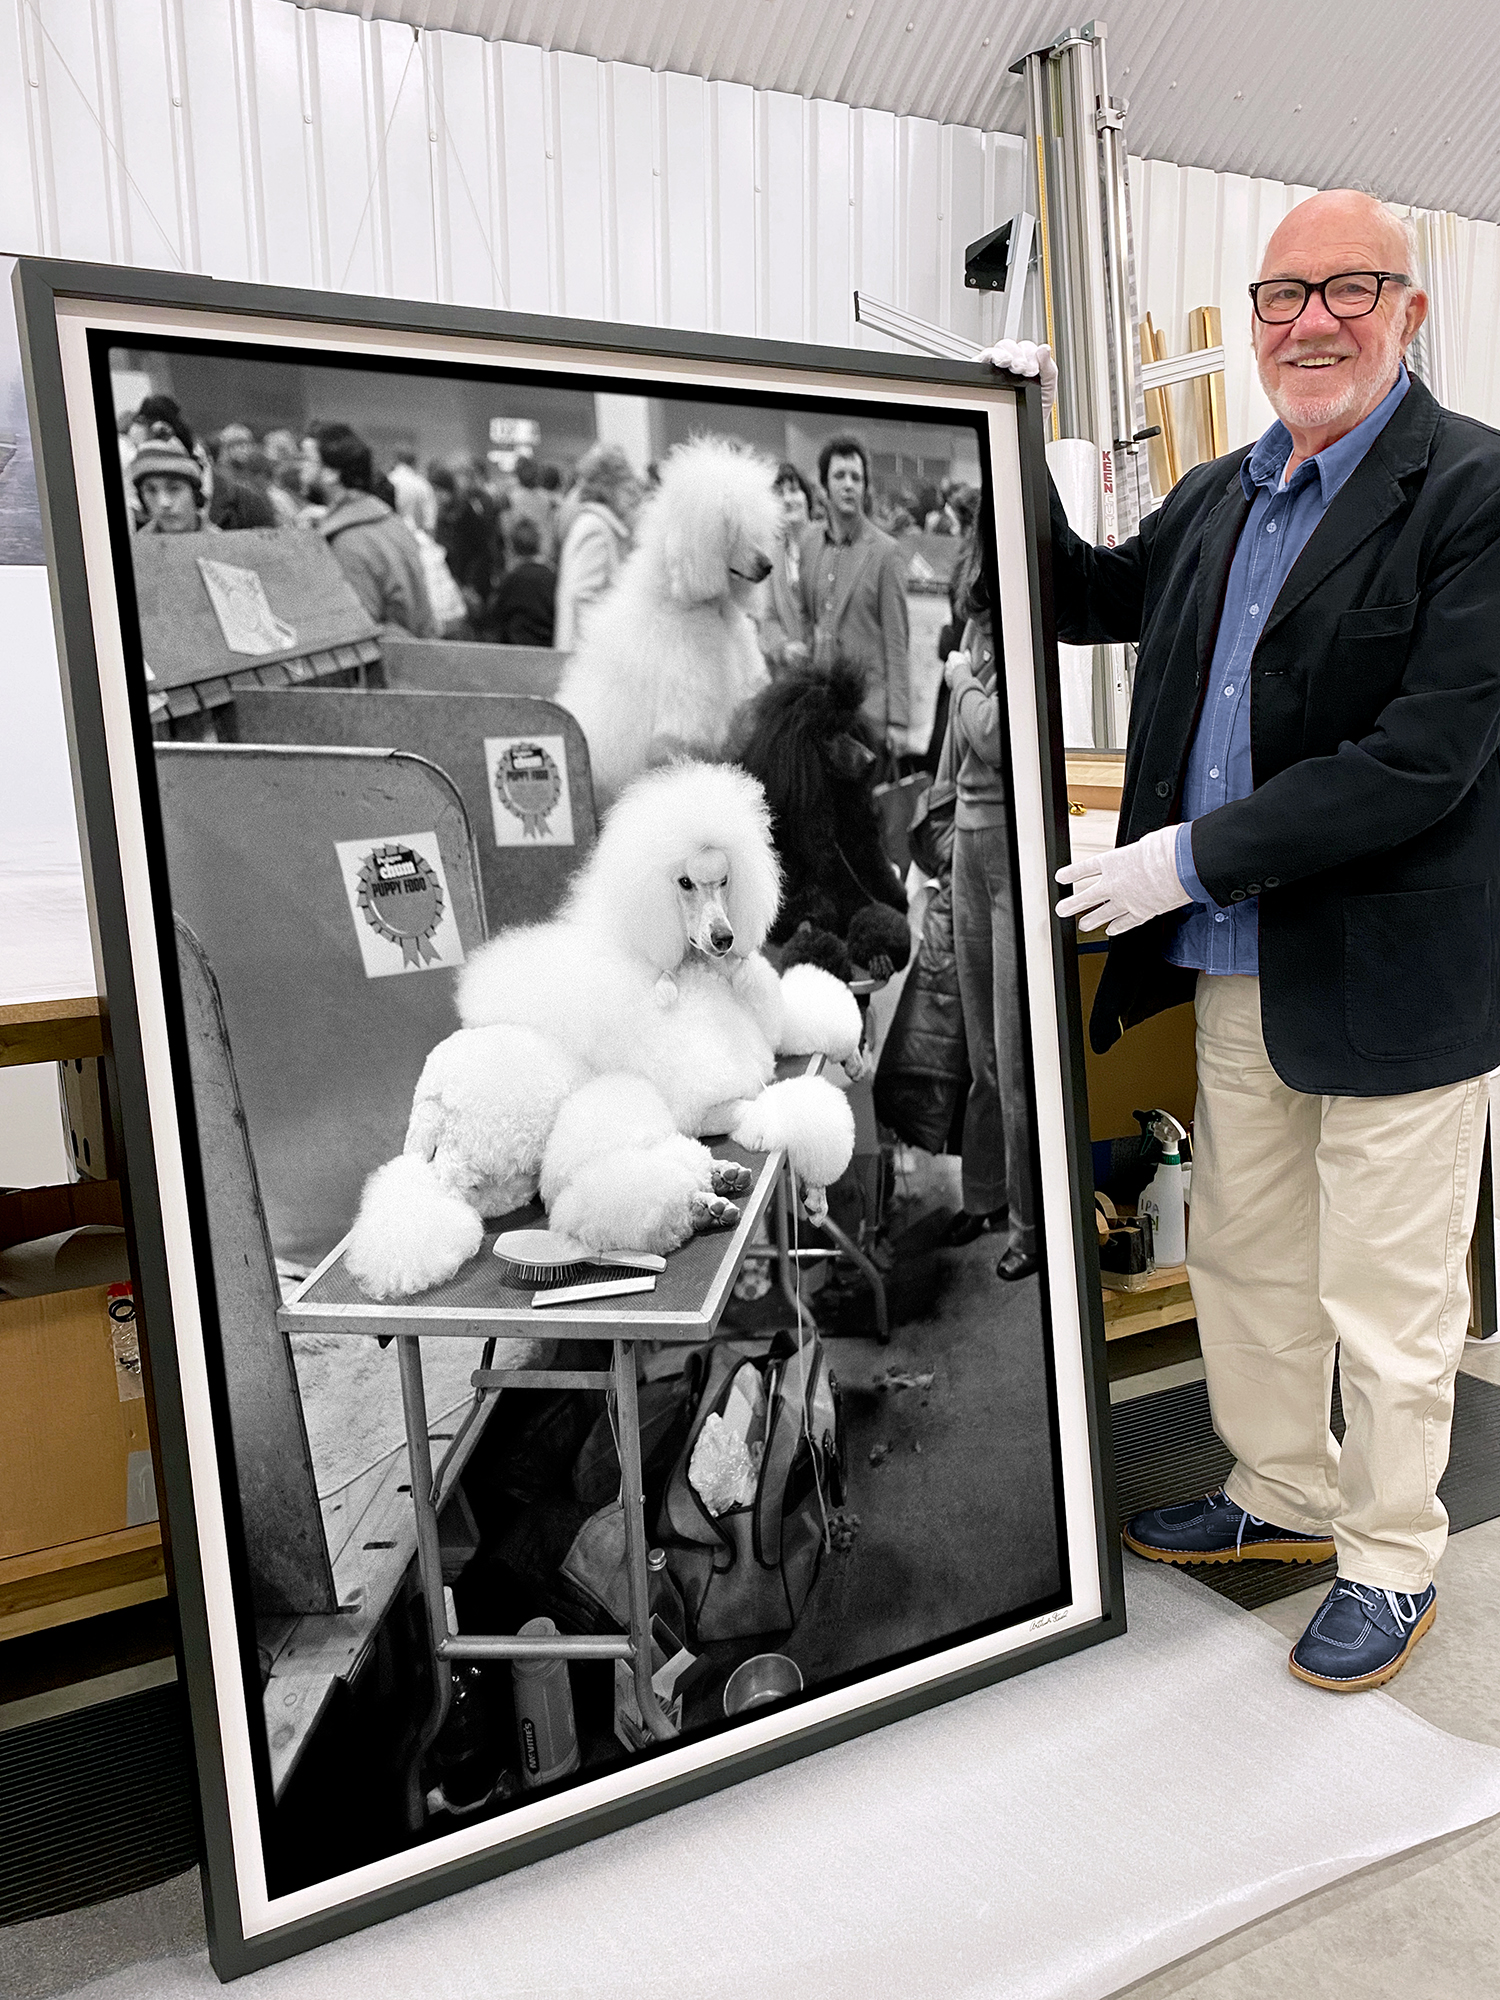 rare-black-and-white-limited-edition-photograph-pampered-pooch-crufts-by-photographer-arthur-steel